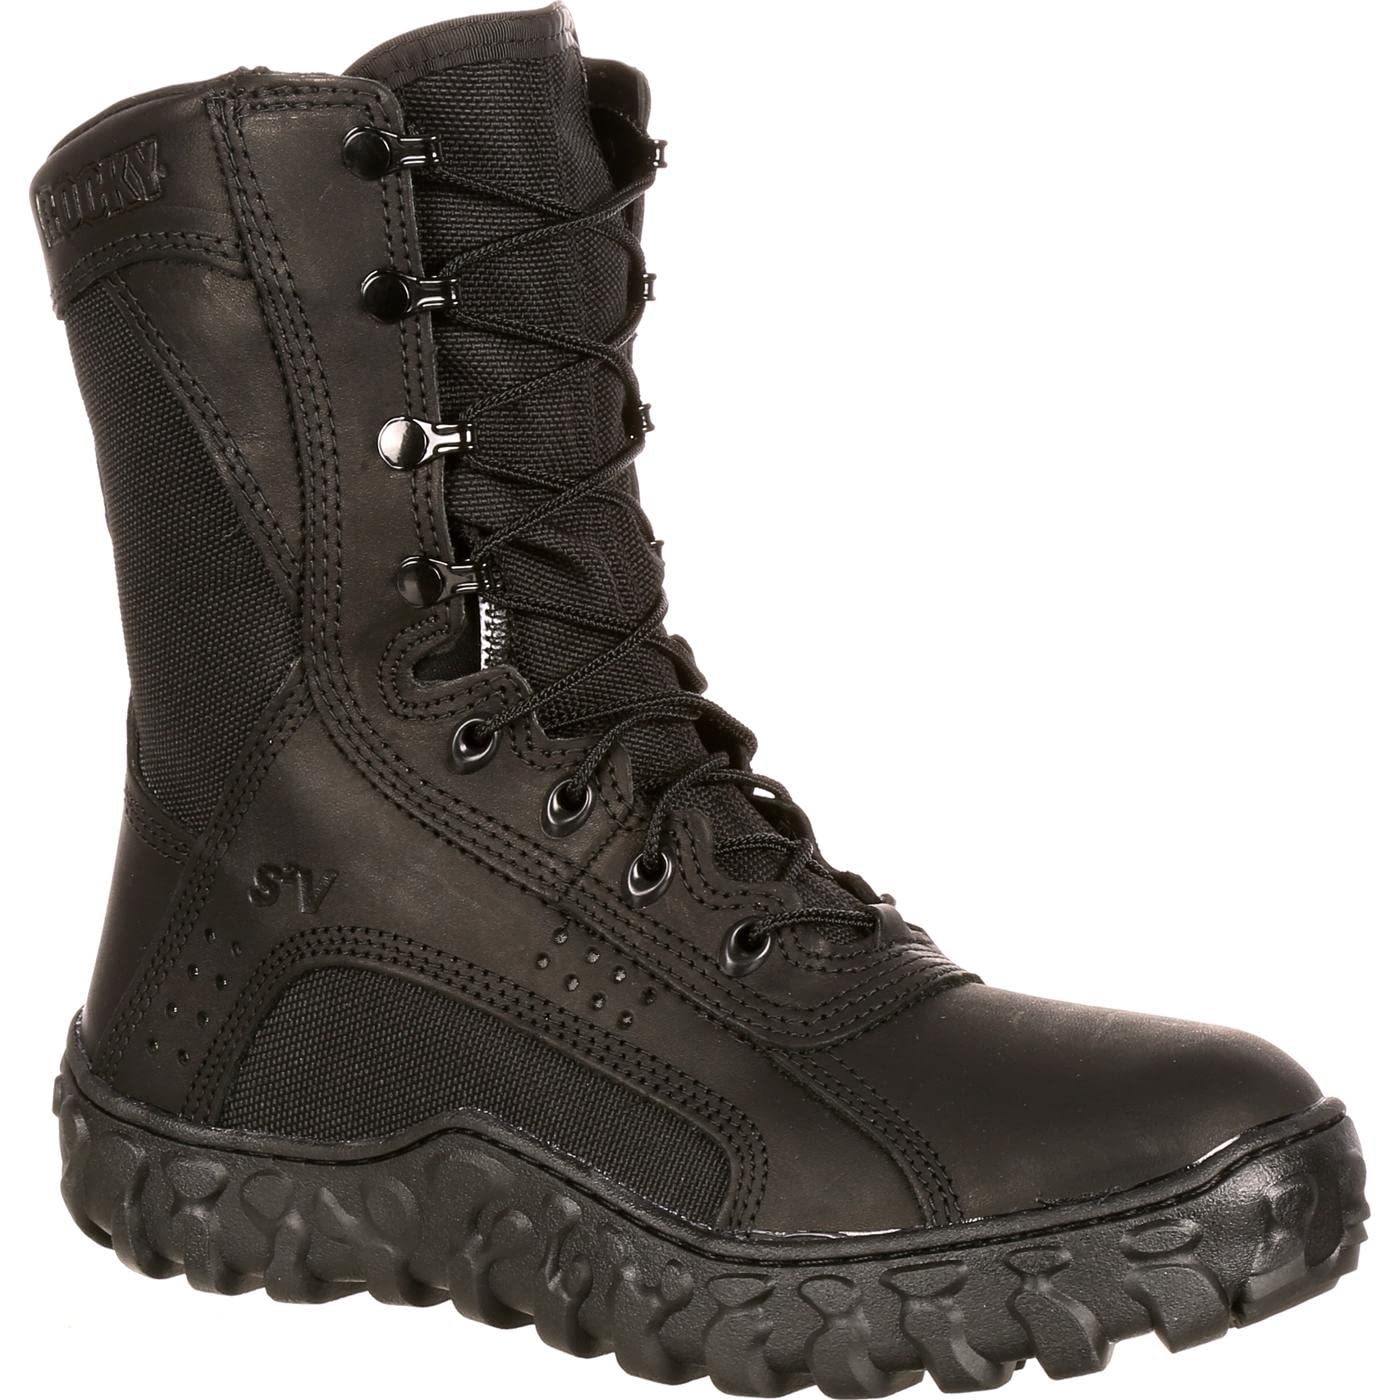 Rocky Men's FQ0000102 Military and Tactical Boot, Black, 13.5 M US